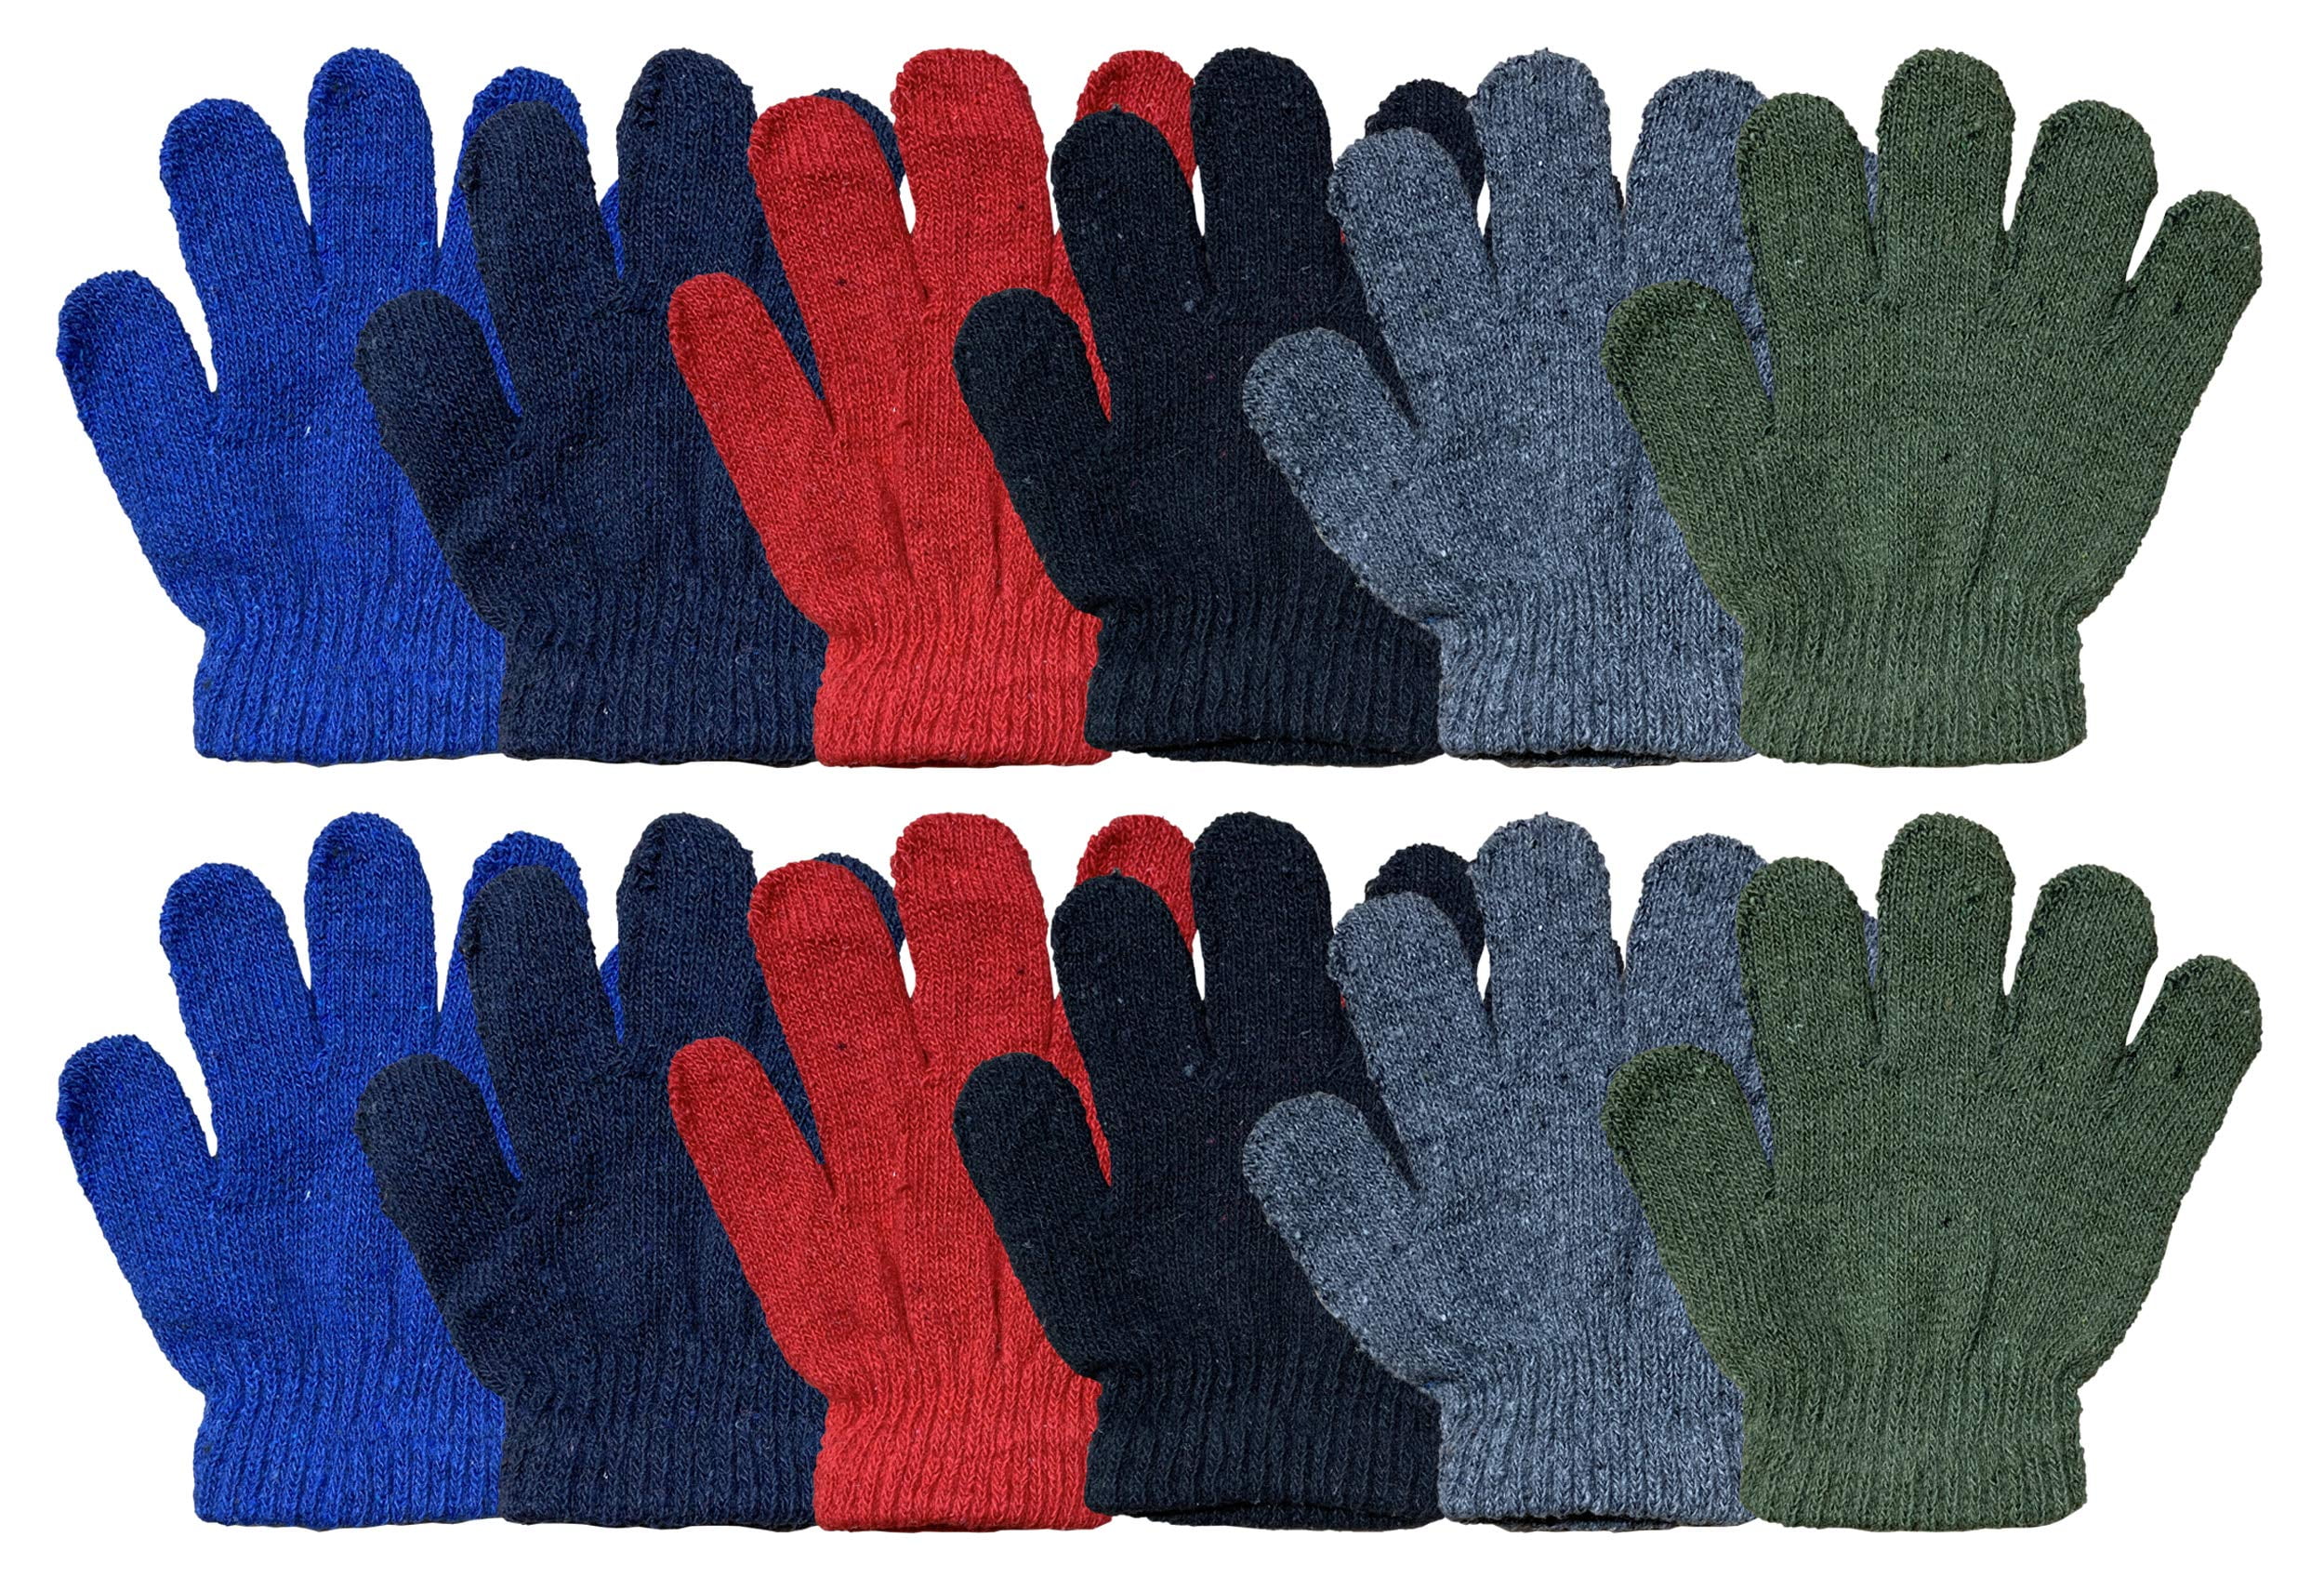 Yacht & Smith 12 Pairs Black/Color) Gloves Childrens Pairs Colored Mittens Mittens, Striped Kids, (12 Striped and Colorful Bulk Solid 3-8. Ages